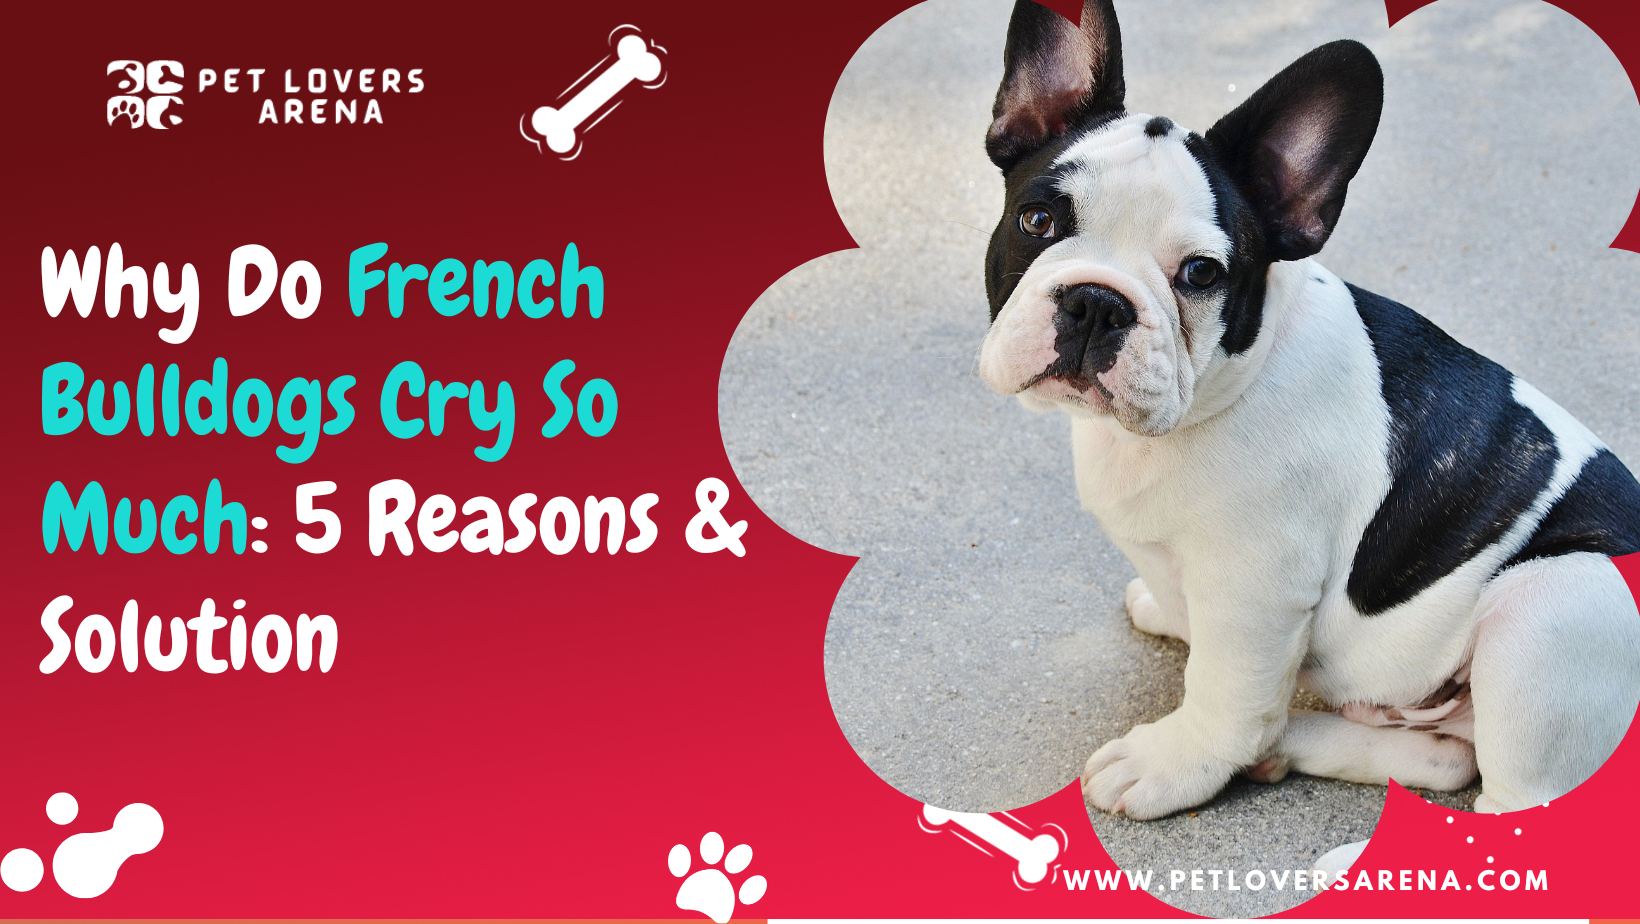 Why Do French Bulldogs Cry So Much: 5 Reasons & Solution